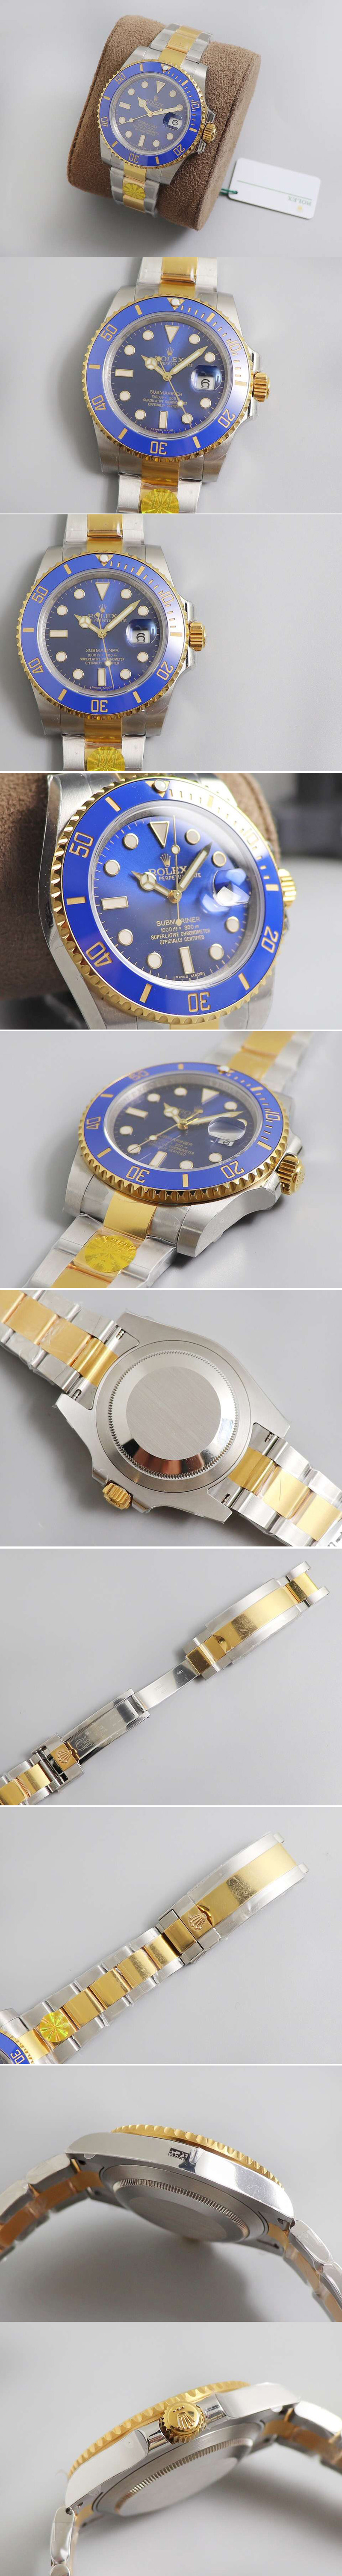 Replica Rolex Submariner 116613 LB SS/YG Blue DIF 1:1 Best Edition 18K Wrapped gold SS/YG Case and Bracelet A2824